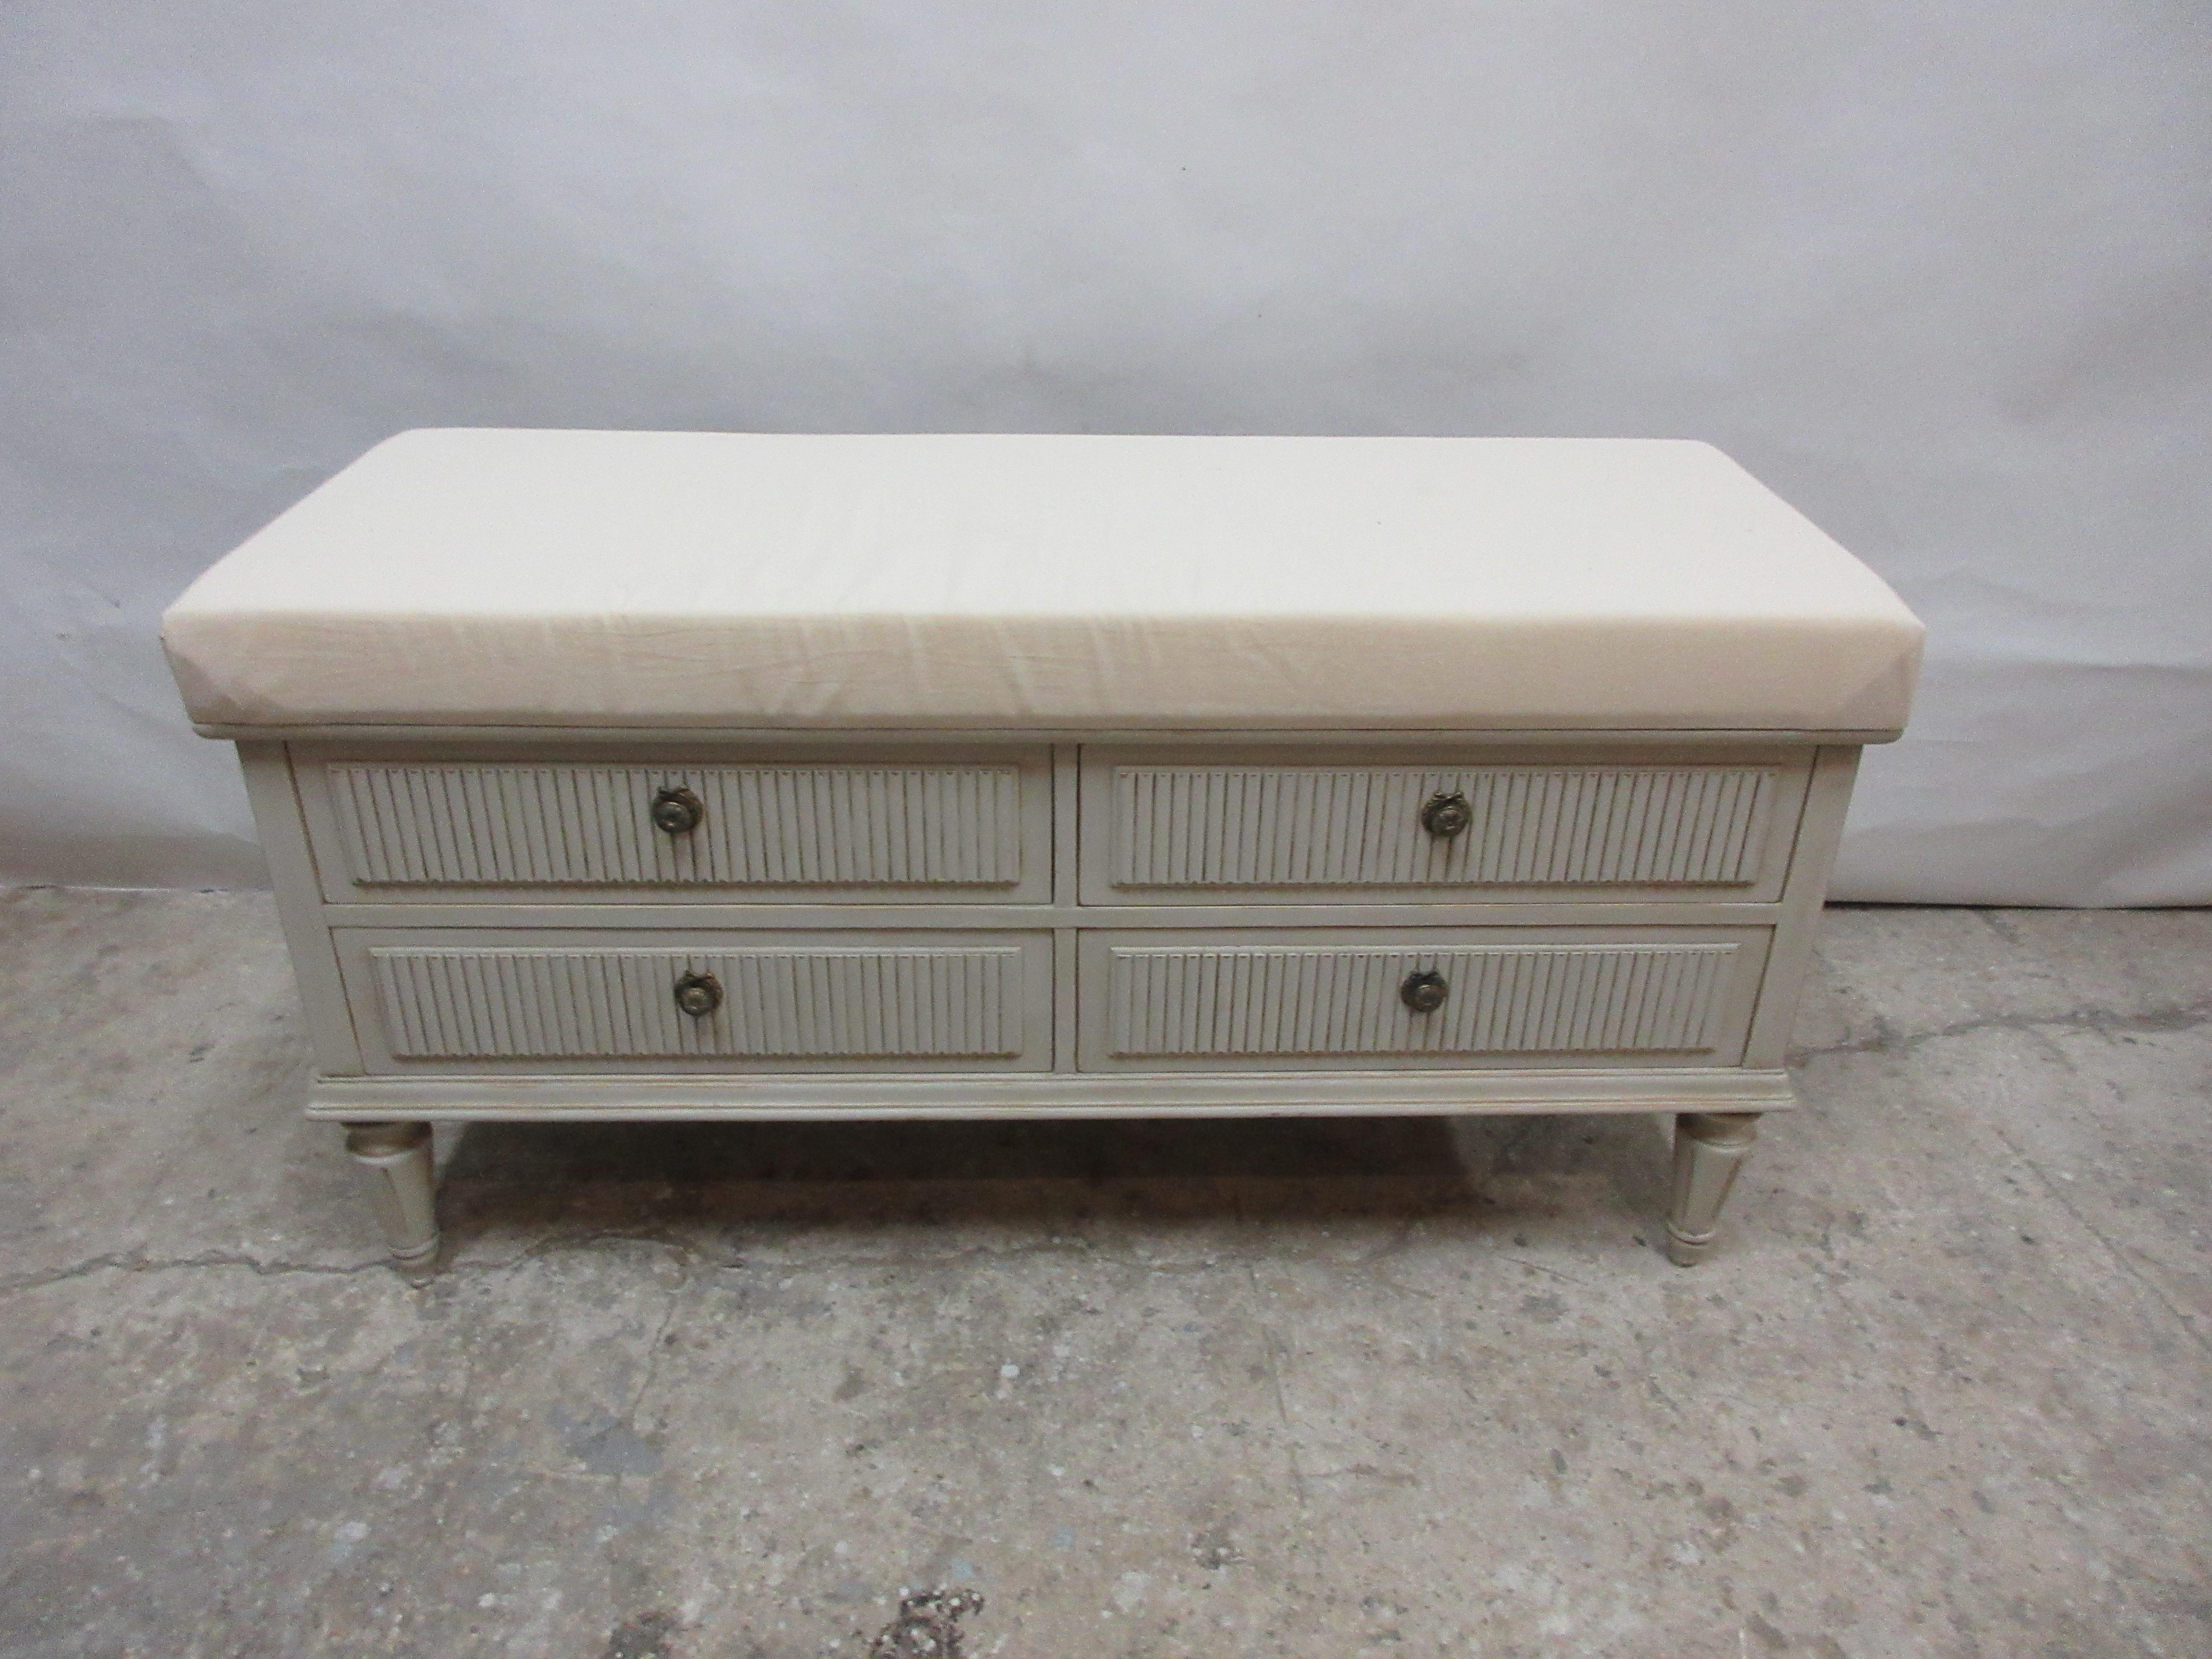 This is a Swedish Gustavian 4-drawer bench, it has been restored and repainted with milk paints 